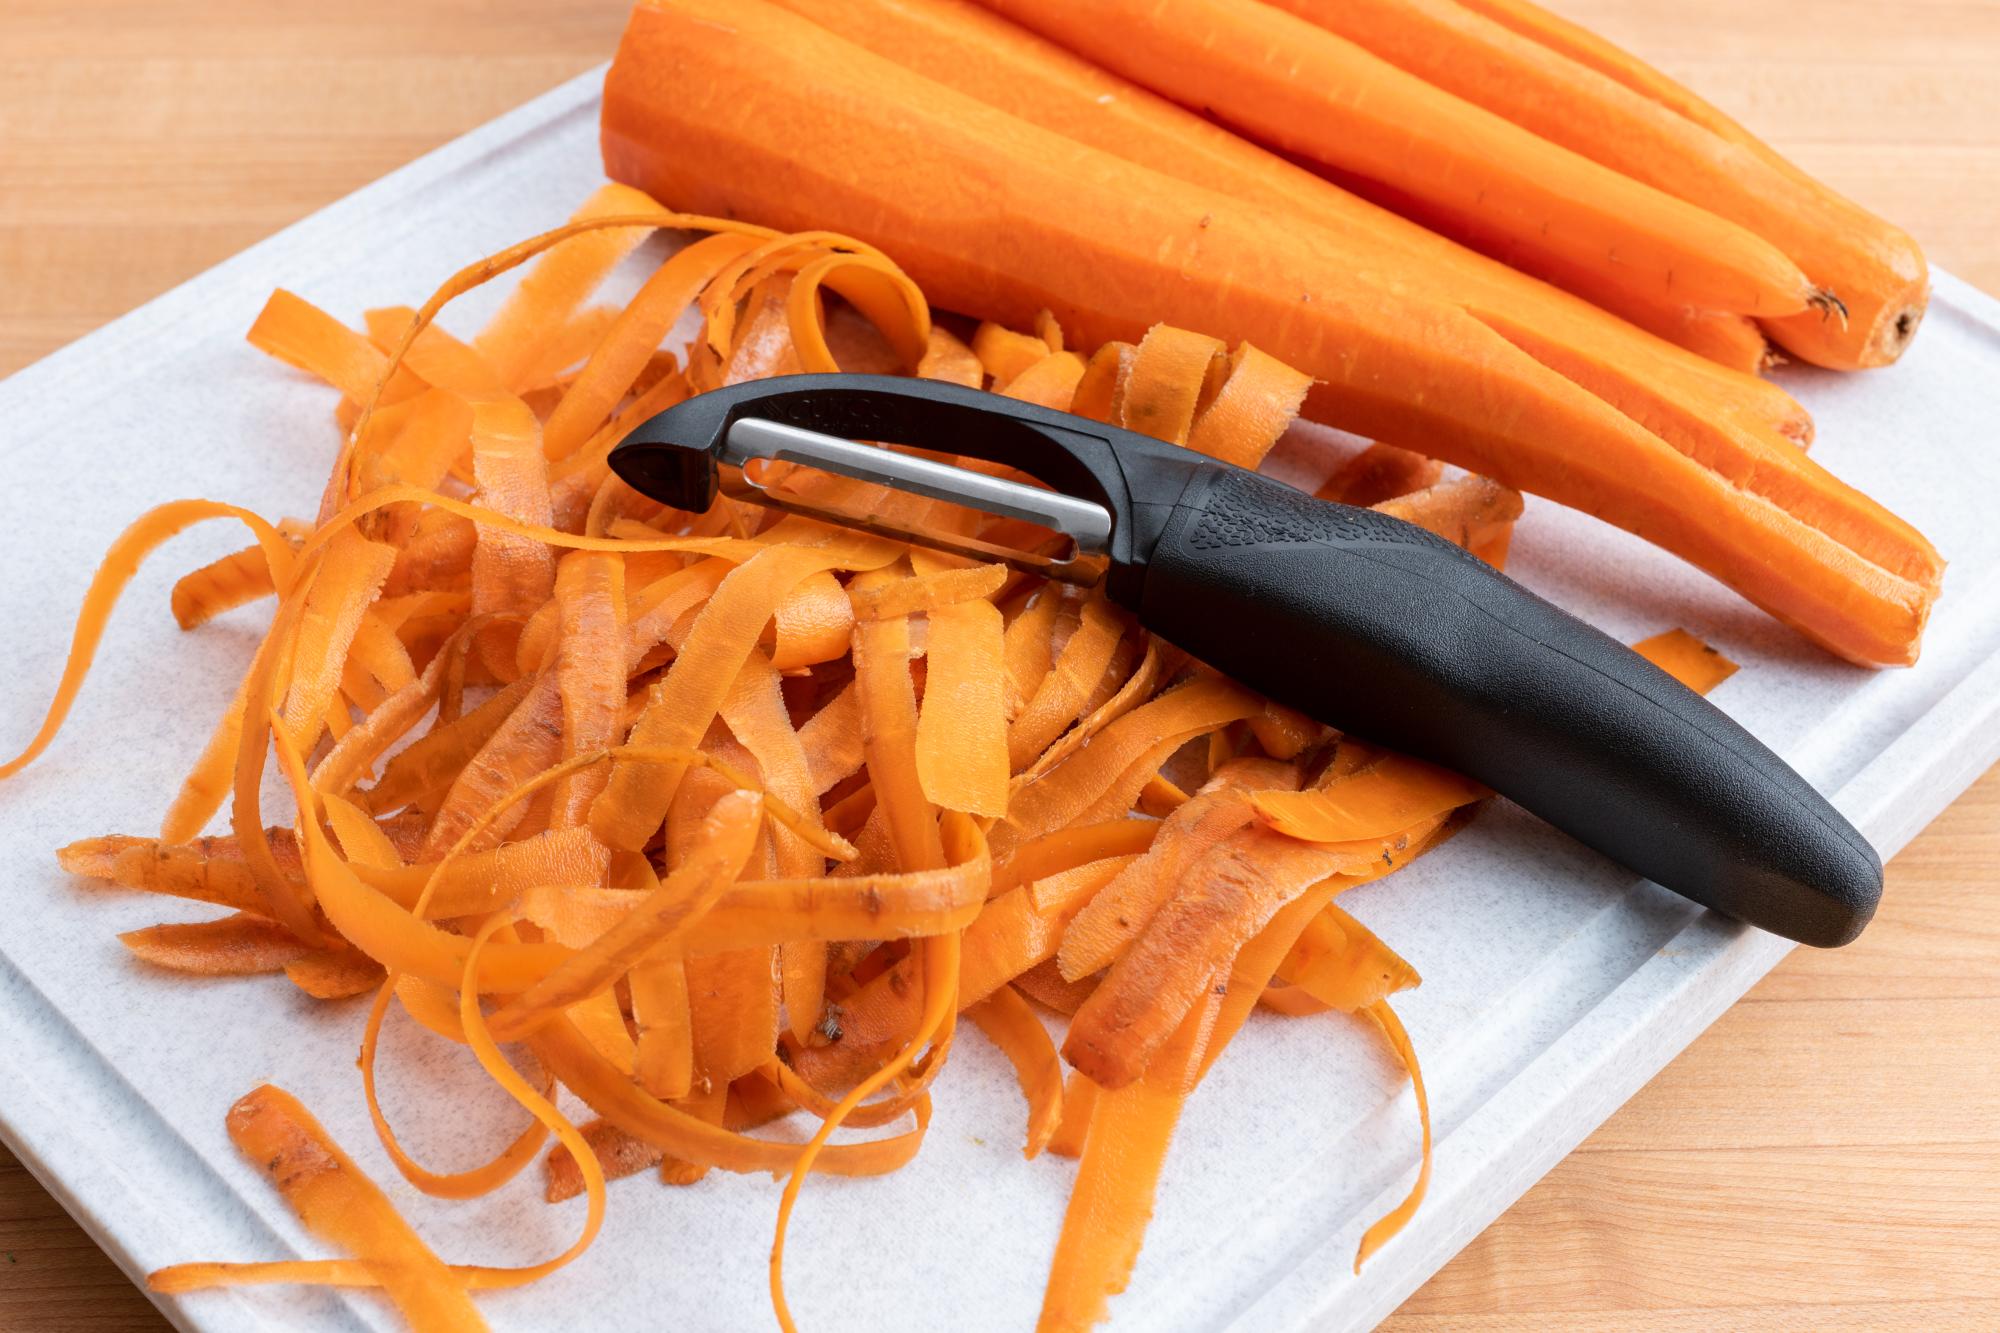 Peeled carrots with a Vegetable Peeler.